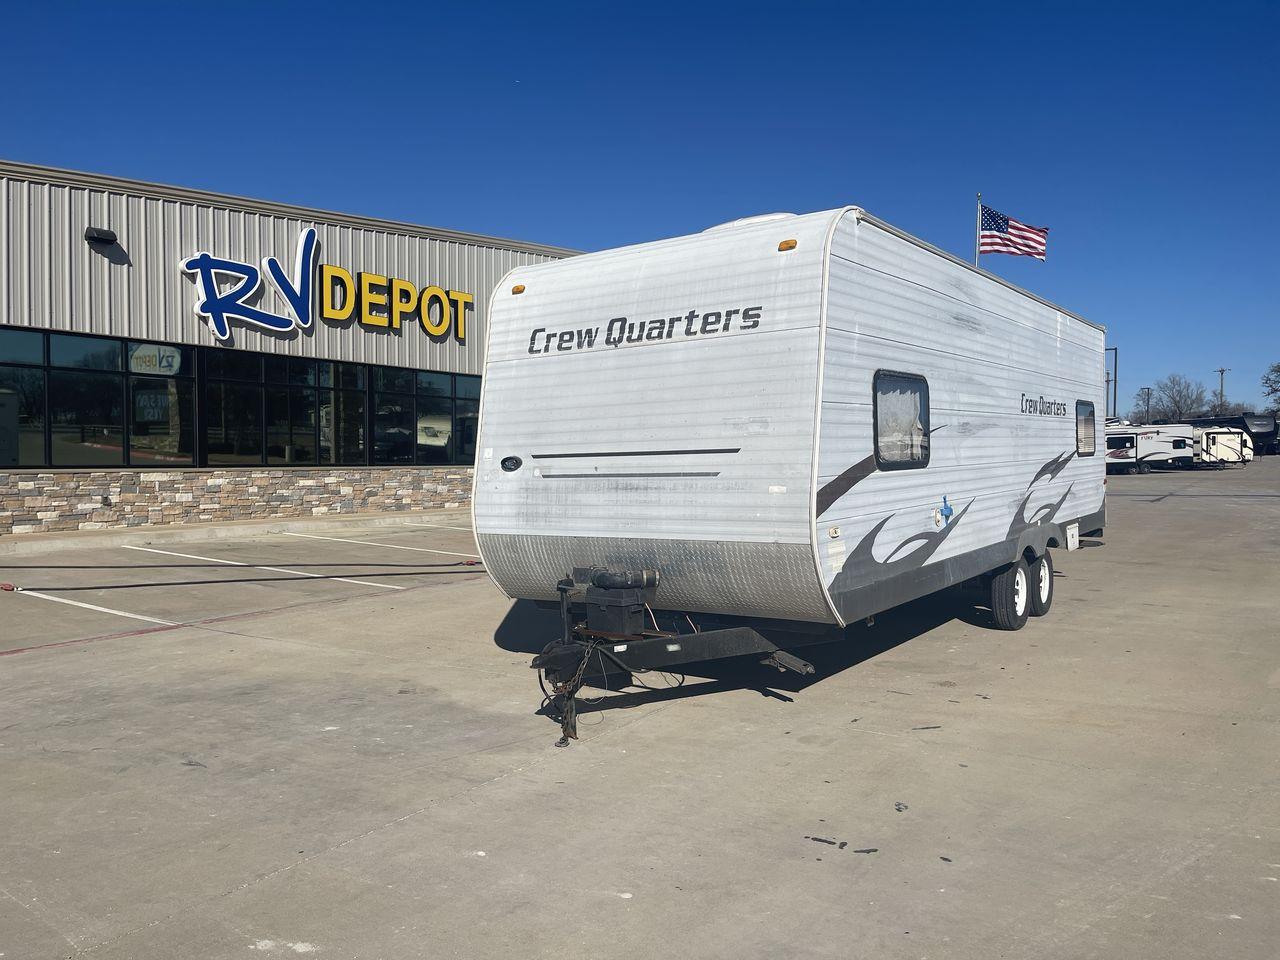 2010 WHITE FOREST RIVER CREW QUARTERS T24-2 - (4X4TWDZ21AR) , Dry Weight: 5,275 lbs | Gross Weight: 7,713 lbs | Slides: 0 transmission, located at 4319 N Main St, Cleburne, TX, 76033, (817) 678-5133, 32.385960, -97.391212 - The 2010 Crew Quarters T24-2 is a cute and cozy travel trailer that comes with lovely features that you would absolutely adore in a camper. It features a corner bunk bed with a nice window on the bottom bunk. It has a mini fridge, a microwave, and a solid surface counter space. A tall double-door ca - Photo #0